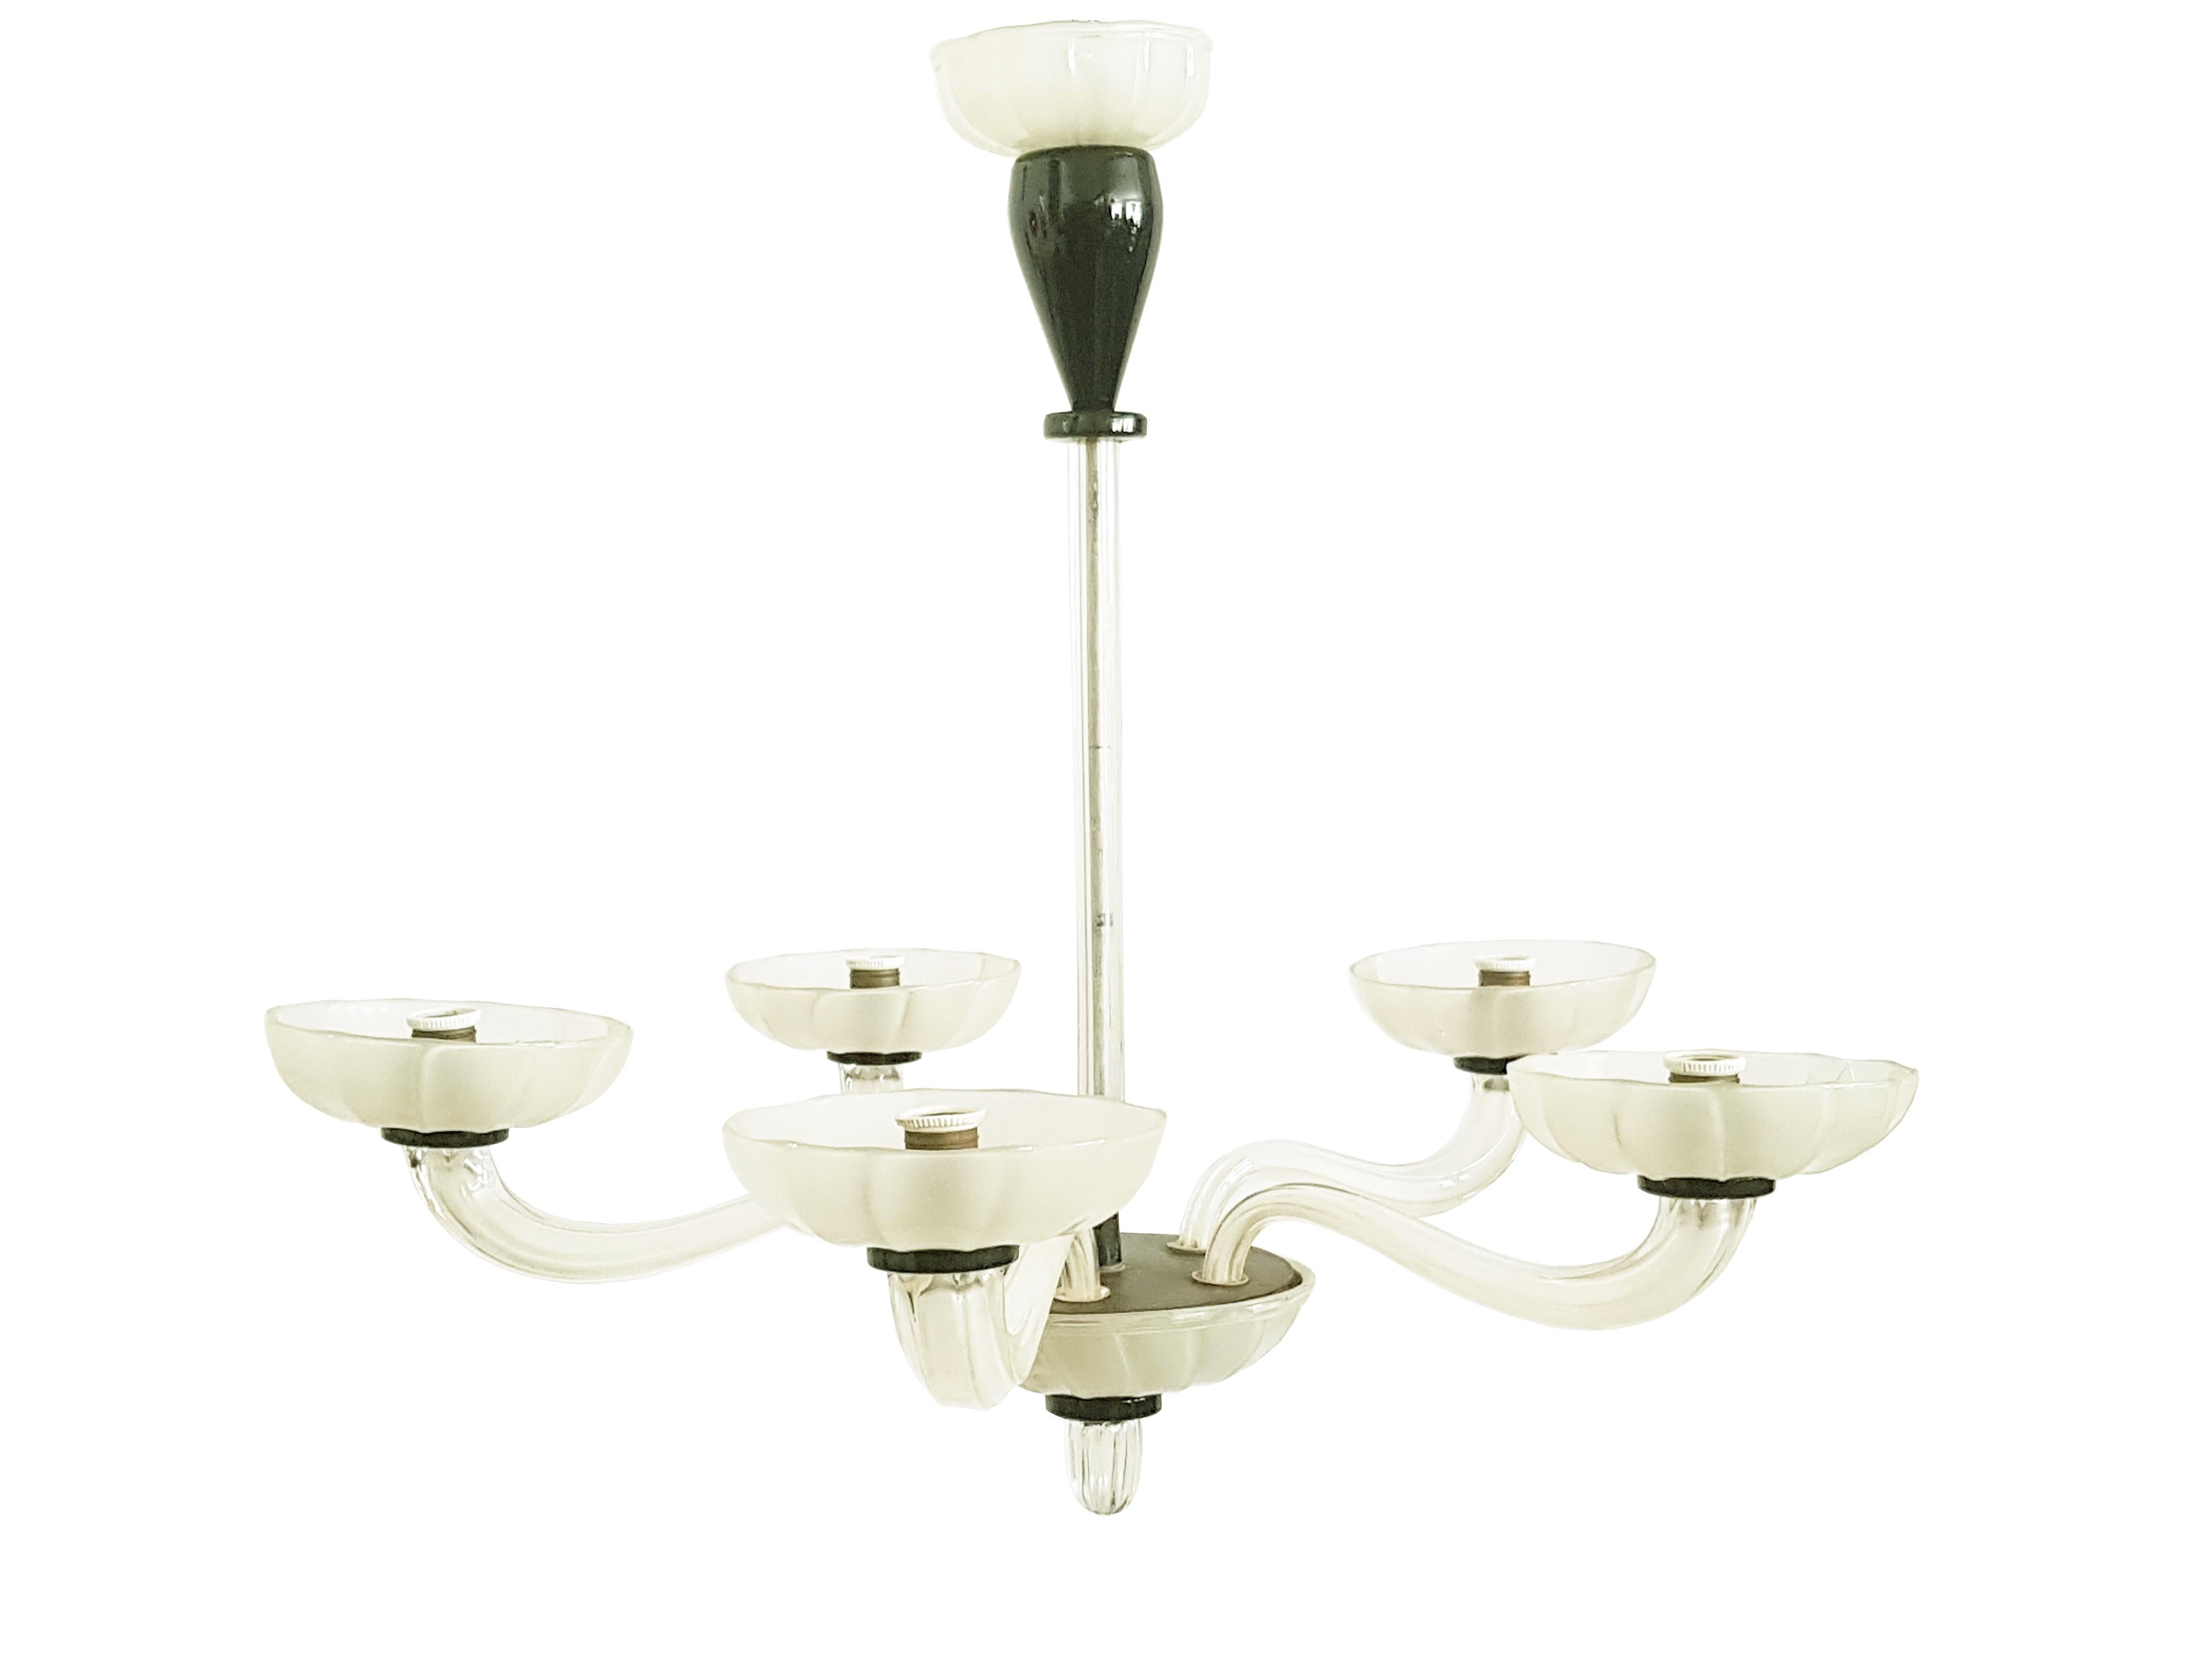 Hand-Crafted Black and White Five-Light Murano Glass 1940s Chandelier